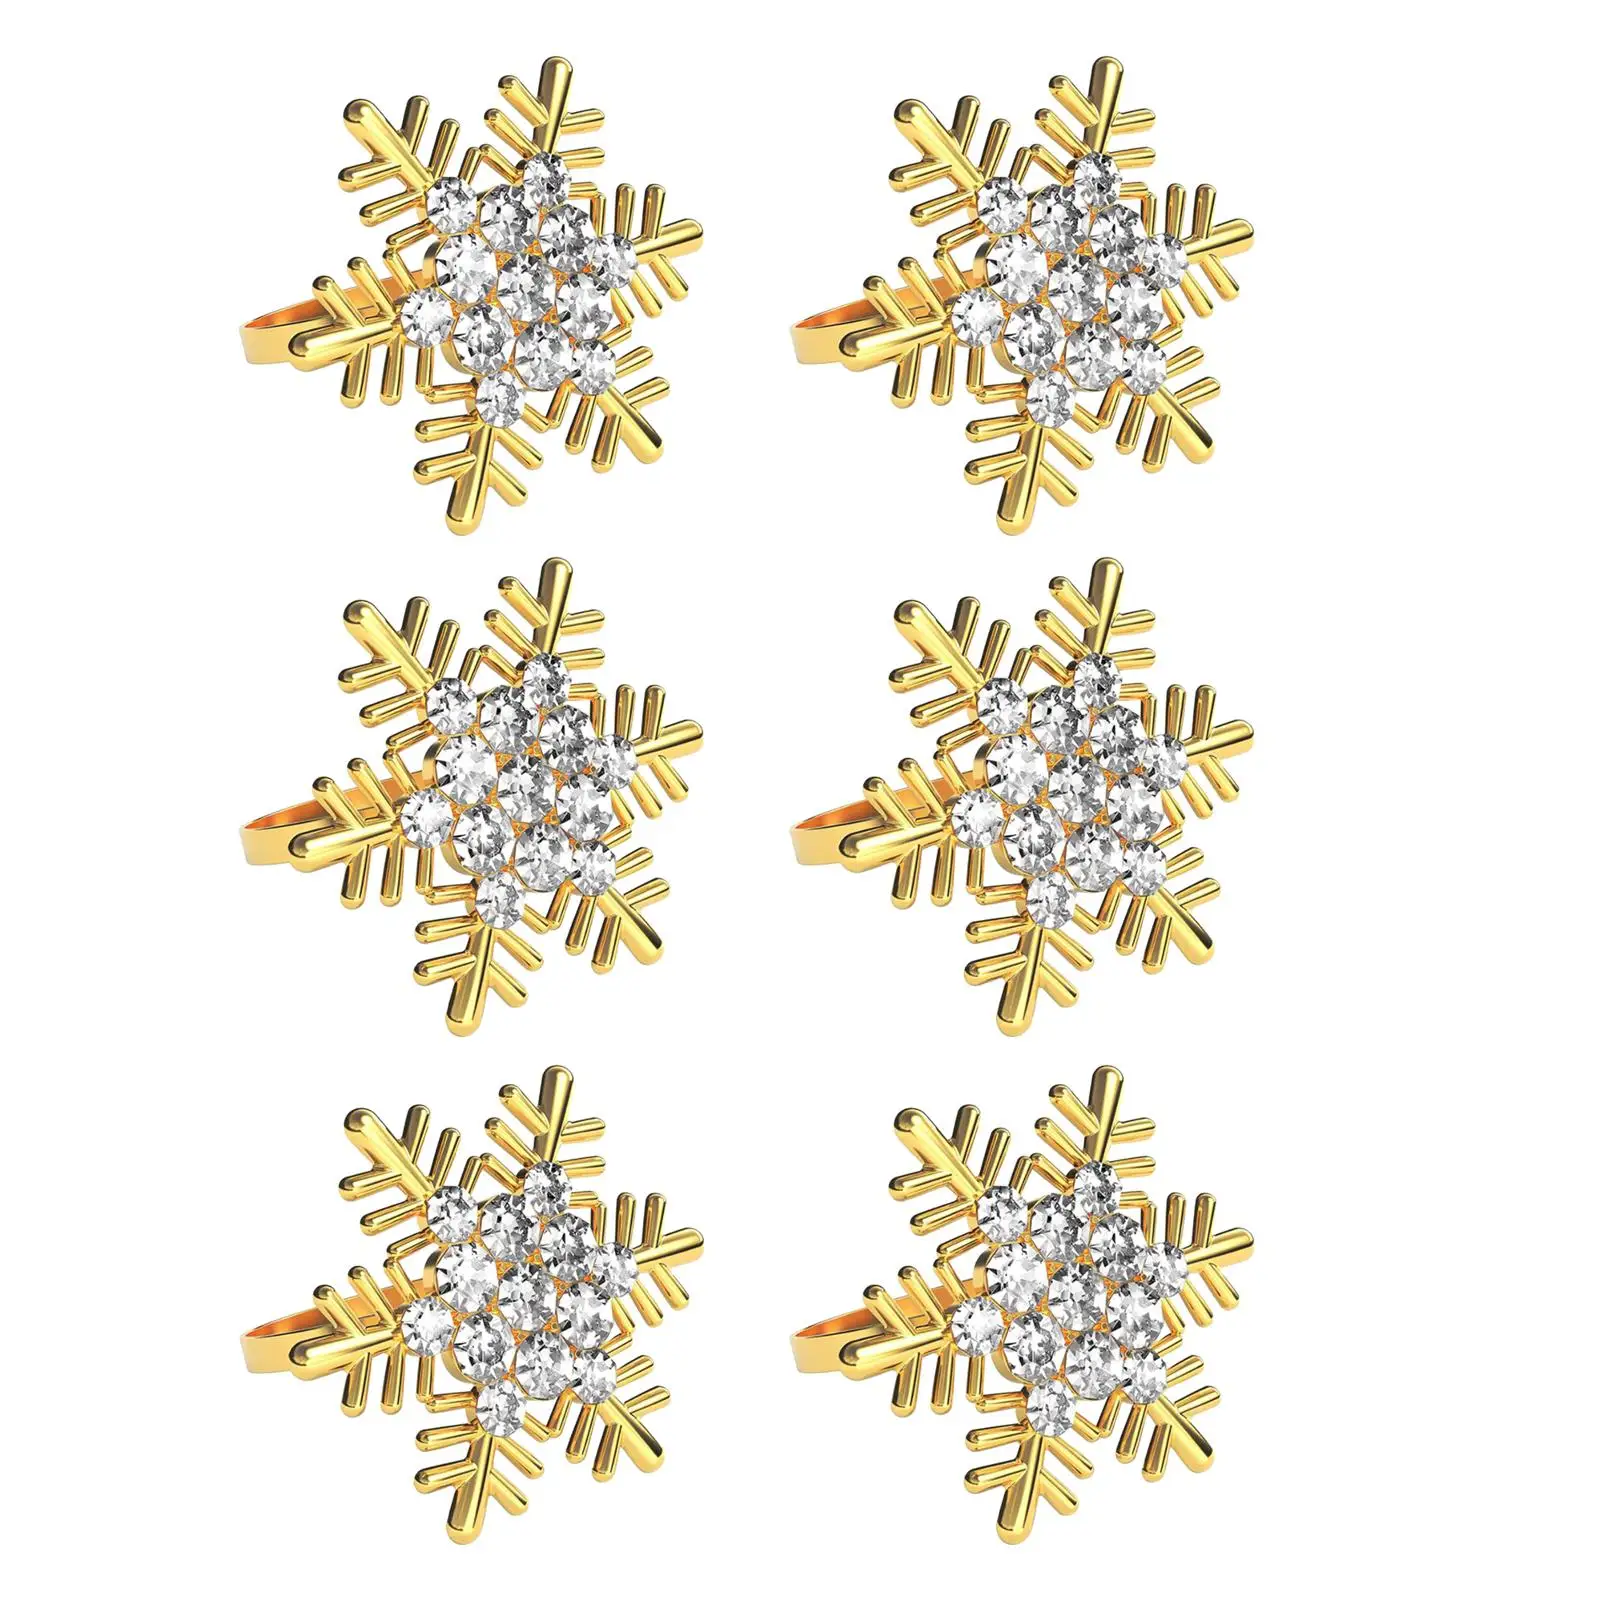 6 Pieces Xmas Snowflake Napkin Rings Household Napkin Buckle Napkin Holders for Party Banquet Wedding Christmas Thanksgiving